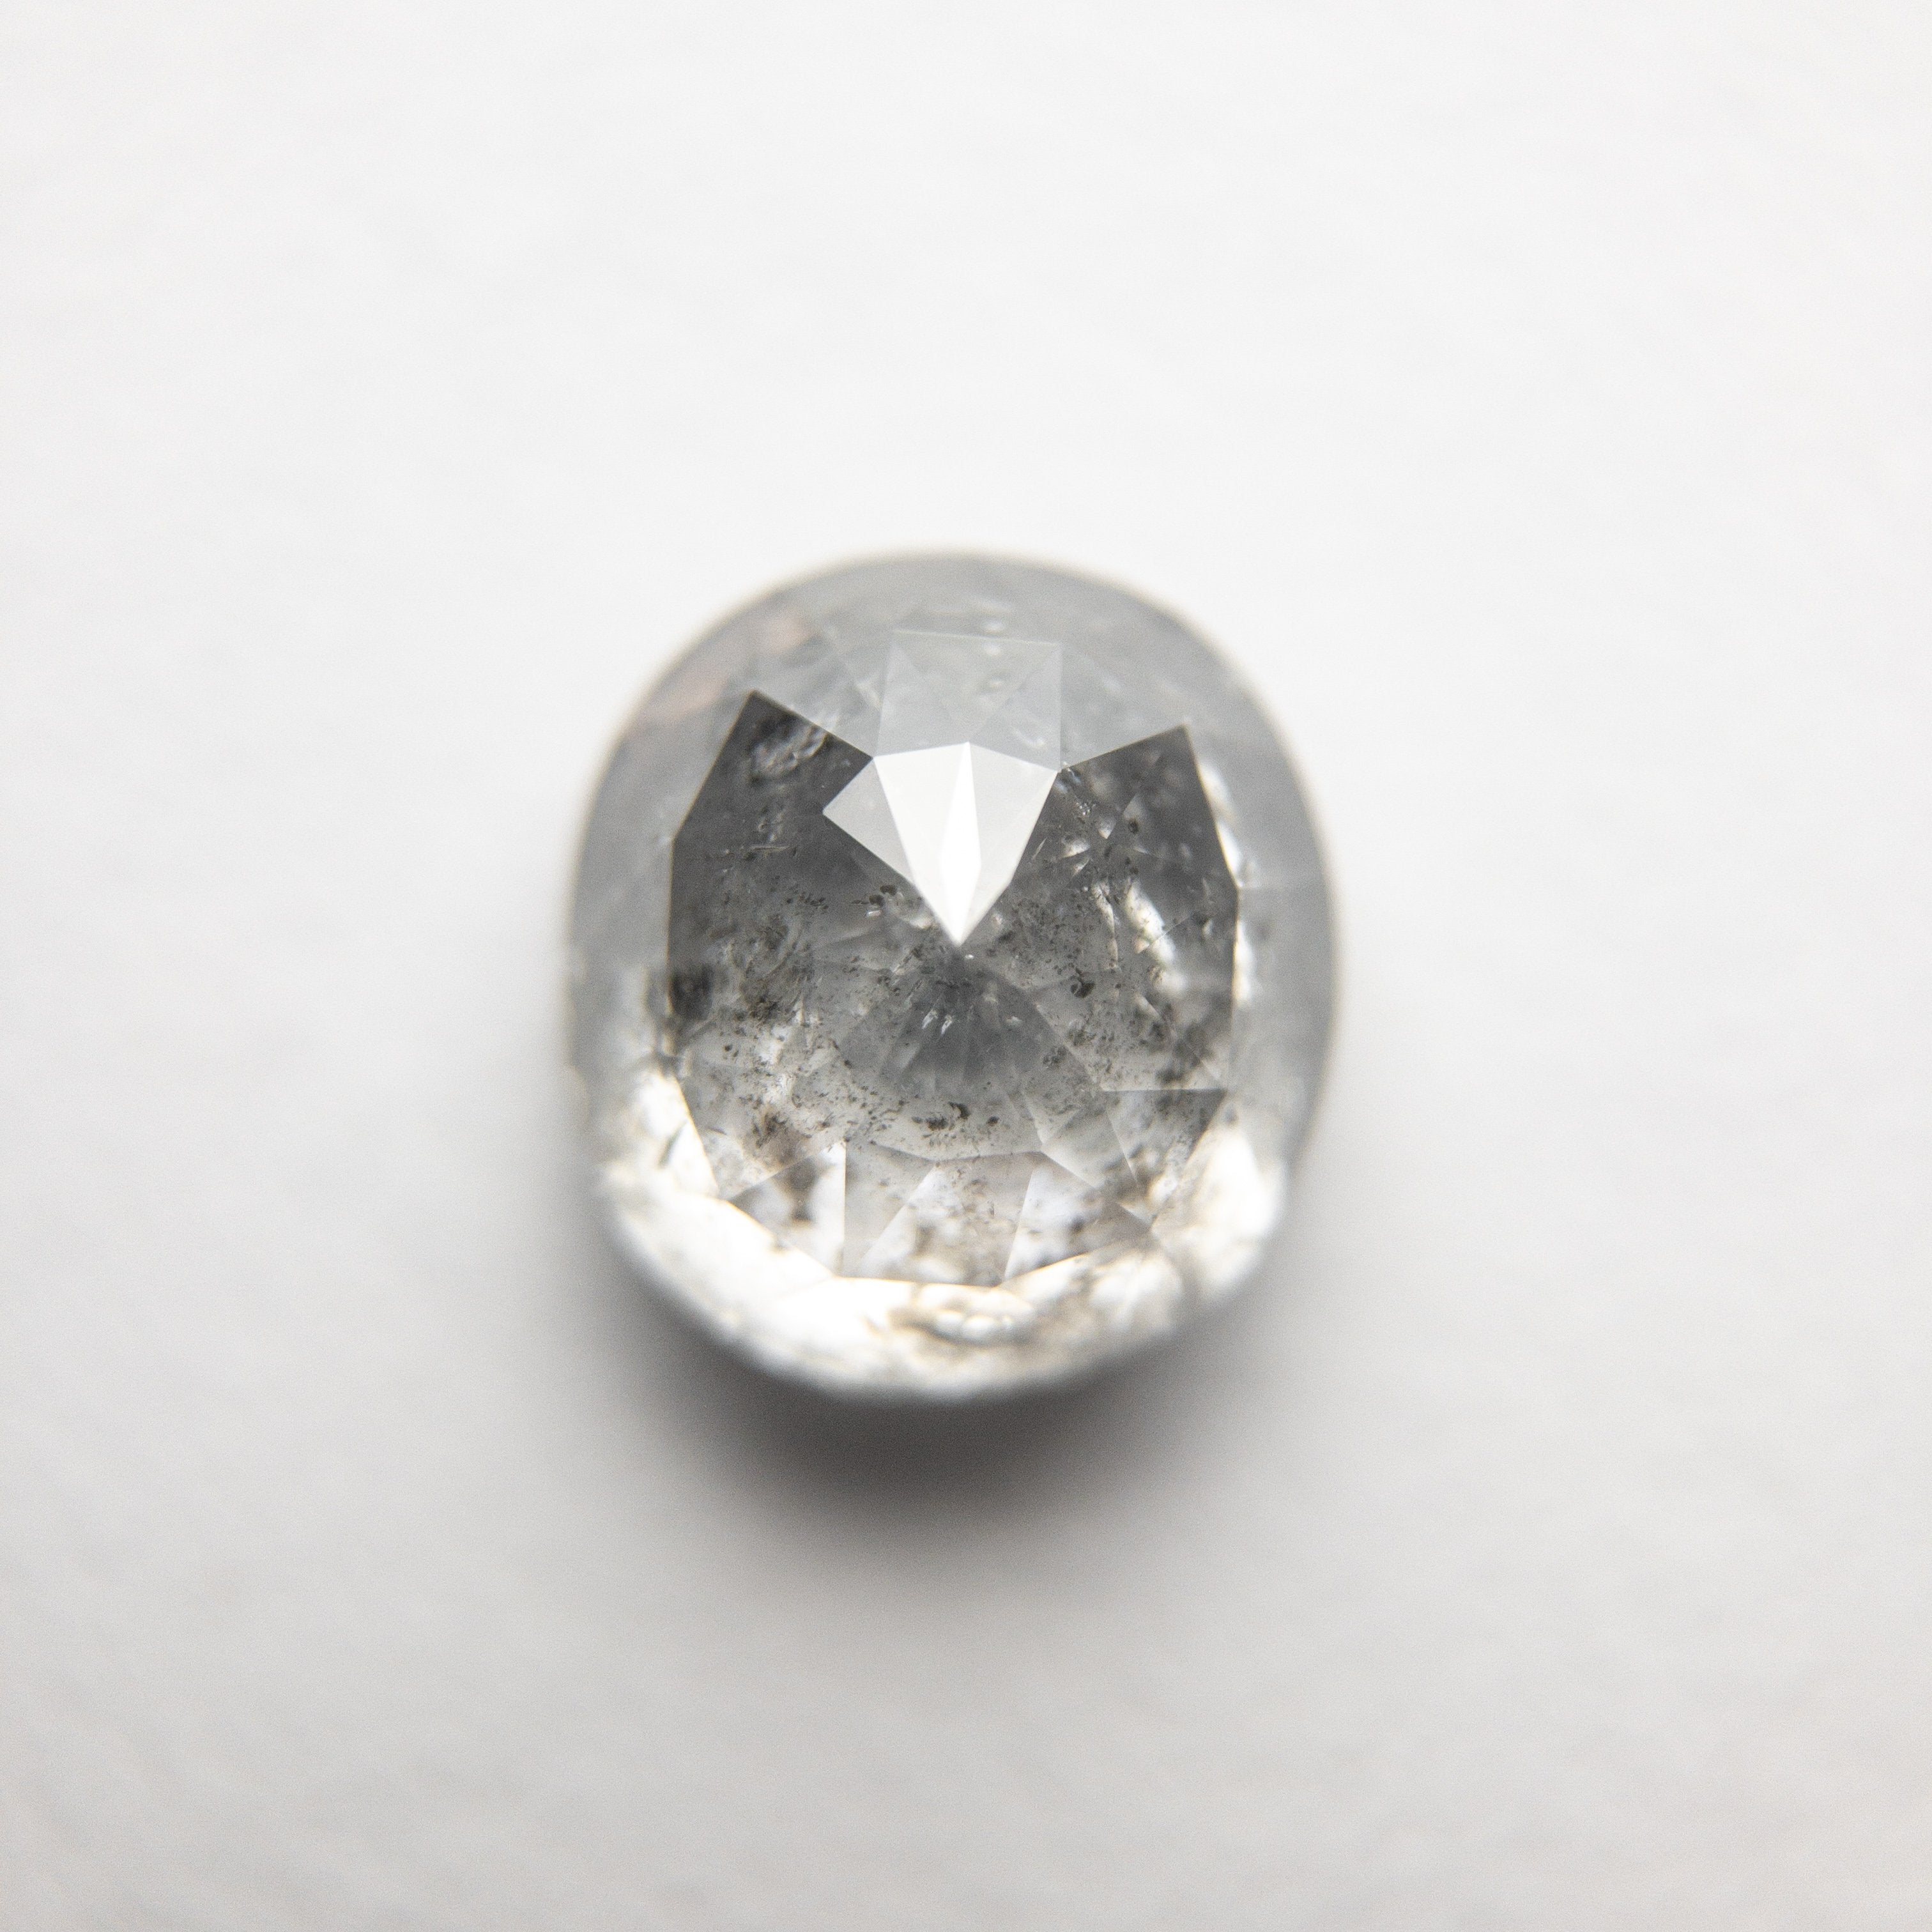 1.96ct 7.26x6.75x4.53mm Oval Double Cut 18352-19 HOLD D1898